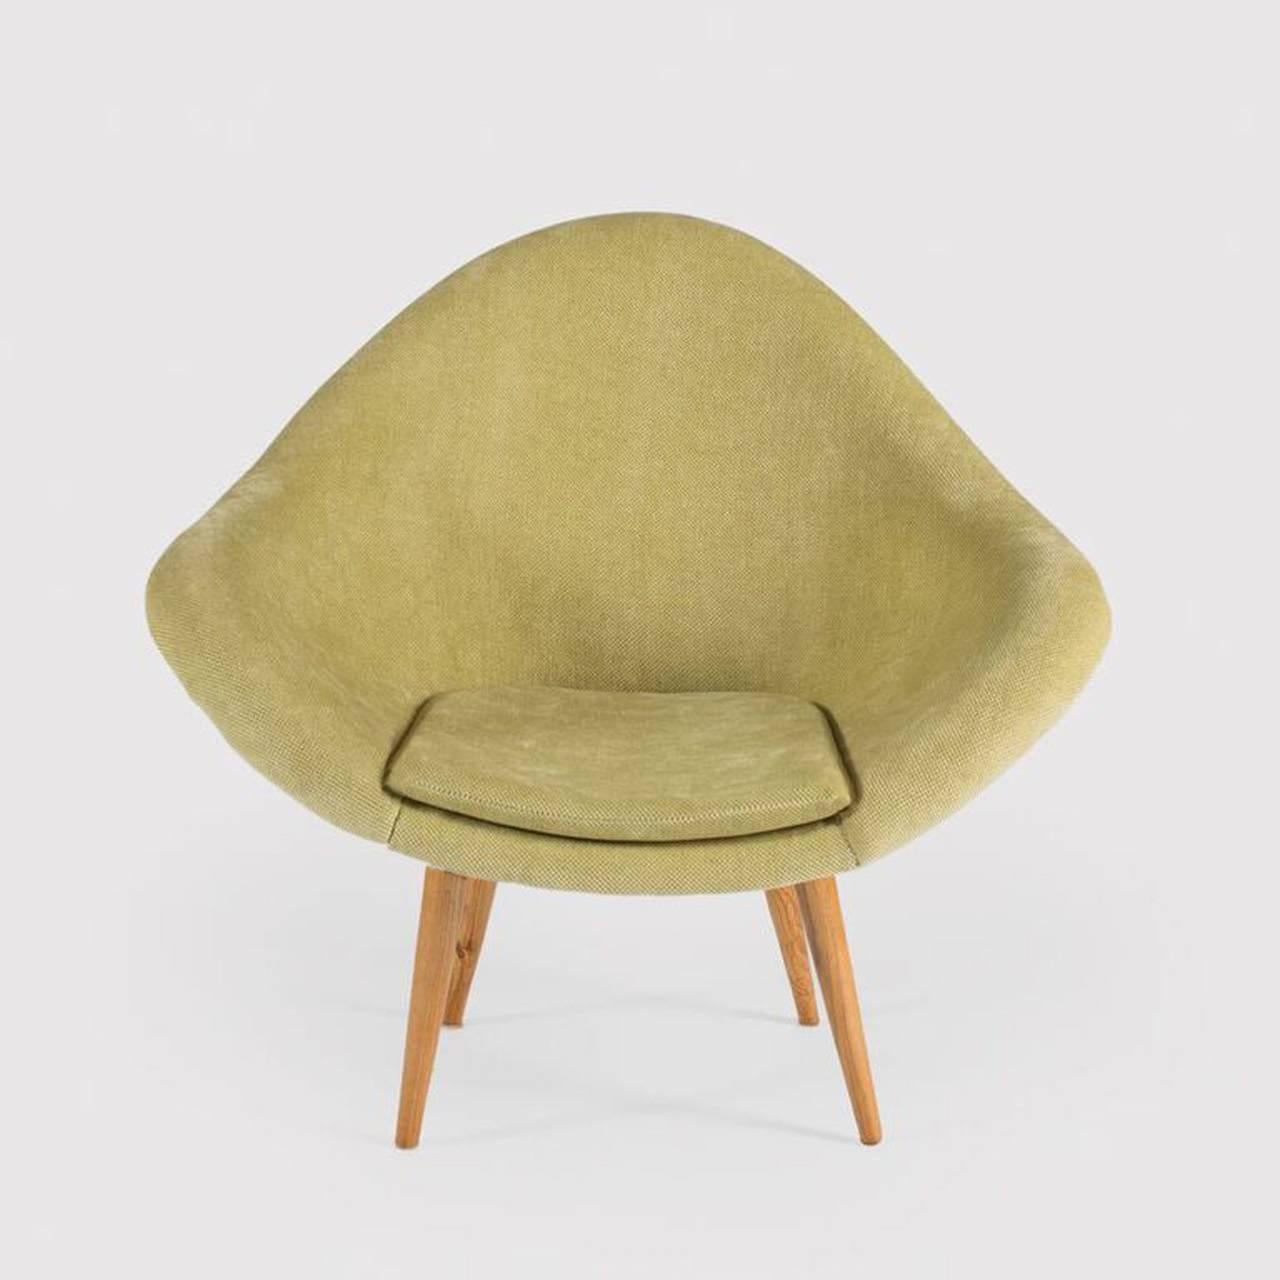 A single armchair by Chech iconic designer Miroslav Navratil, manufactured by Developmental Furniture Industry- Brno. Beech legs with black painted metal fittings. Fiberglass shell newly upholstered in light green fabric.